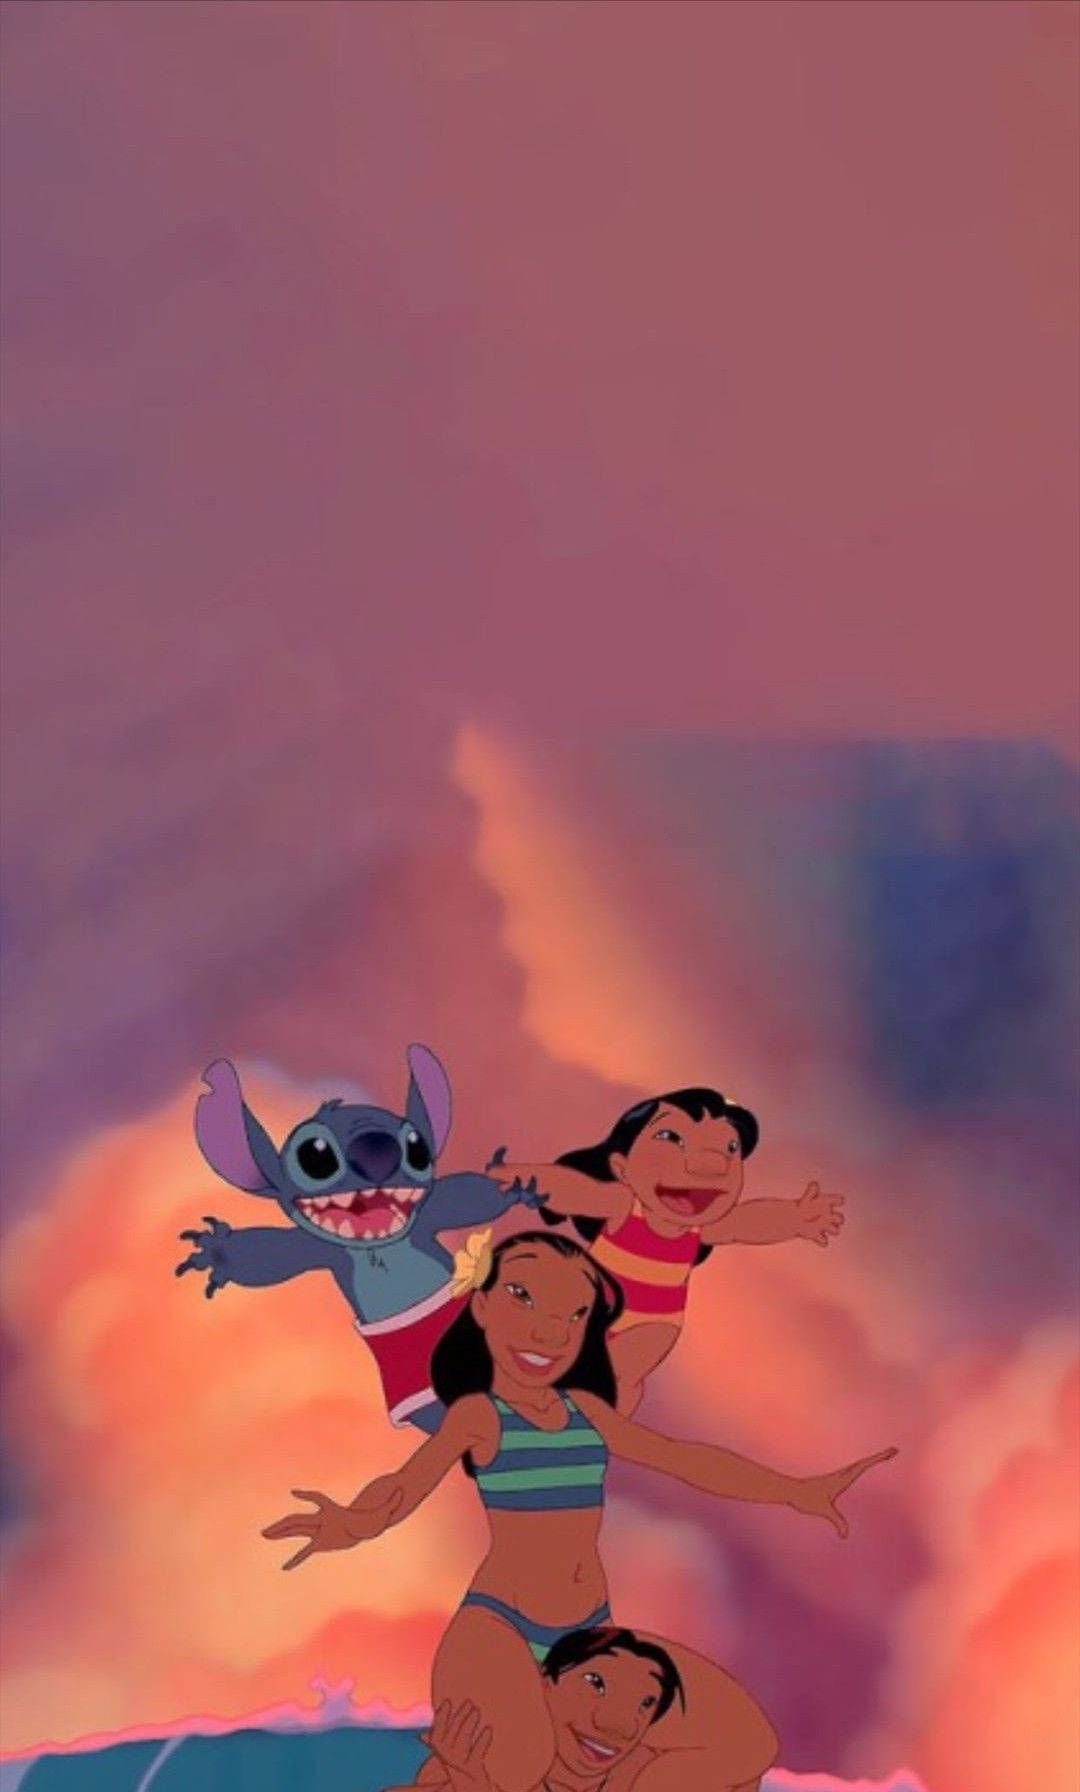 Lilo and Stitch iPhone Wallpaper with high-resolution 1080x1920 pixel. You can use this wallpaper for your iPhone 5, 6, 7, 8, X, XS, XR backgrounds, Mobile Screensaver, or iPad Lock Screen - Stitch